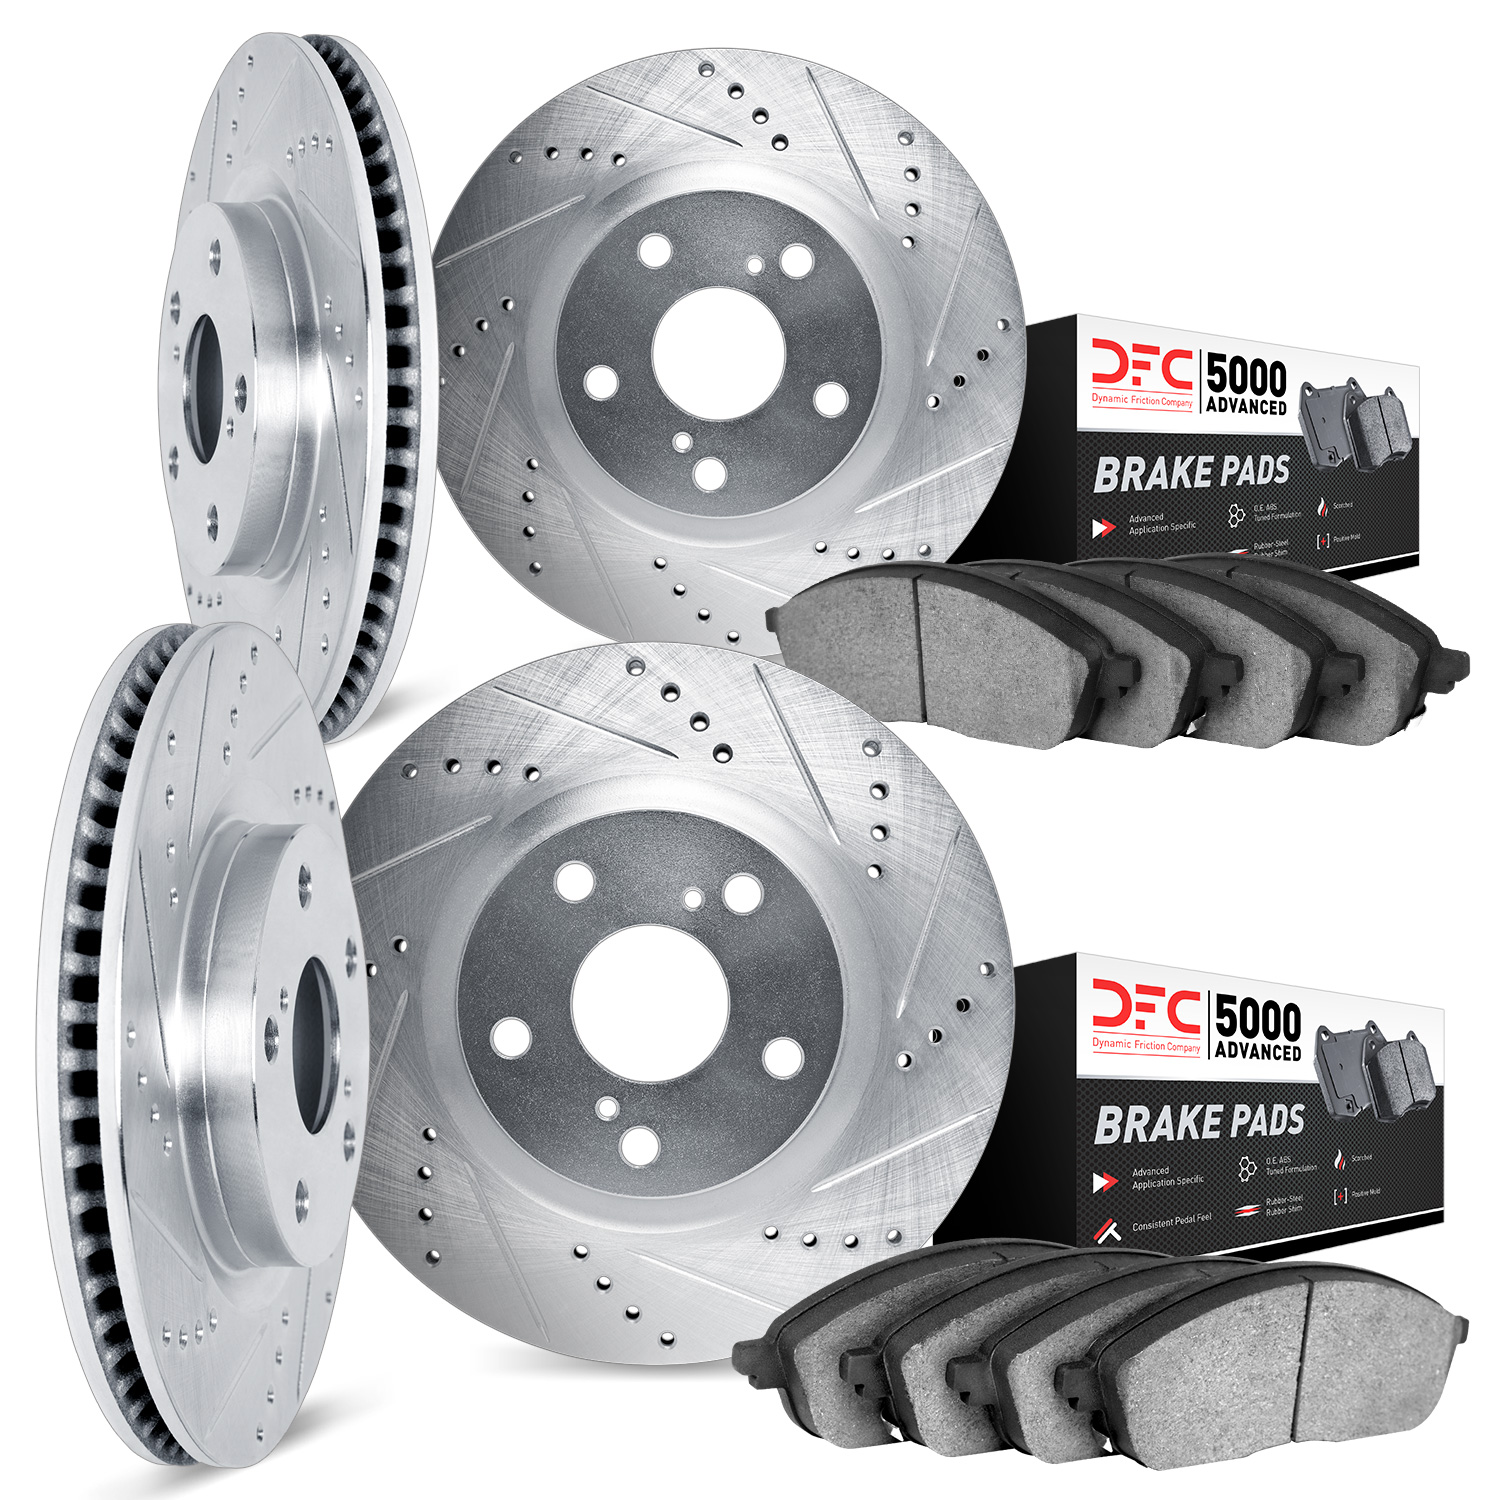 7504-31014 Drilled/Slotted Brake Rotors w/5000 Advanced Brake Pads Kit [Silver], 2004-2007 BMW, Position: Front and Rear